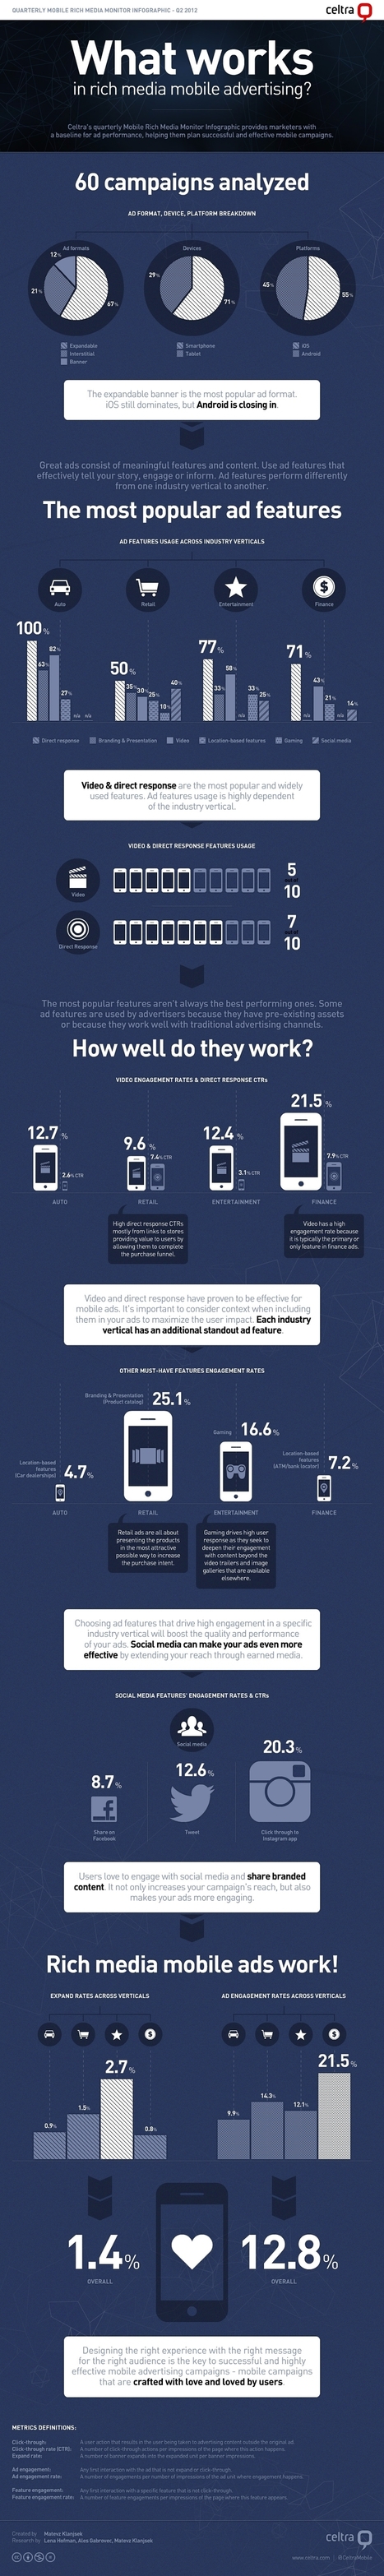 Rich Media Mobile Advertising - Here's What Works [Infographic] | MobileWeb | Scoop.it